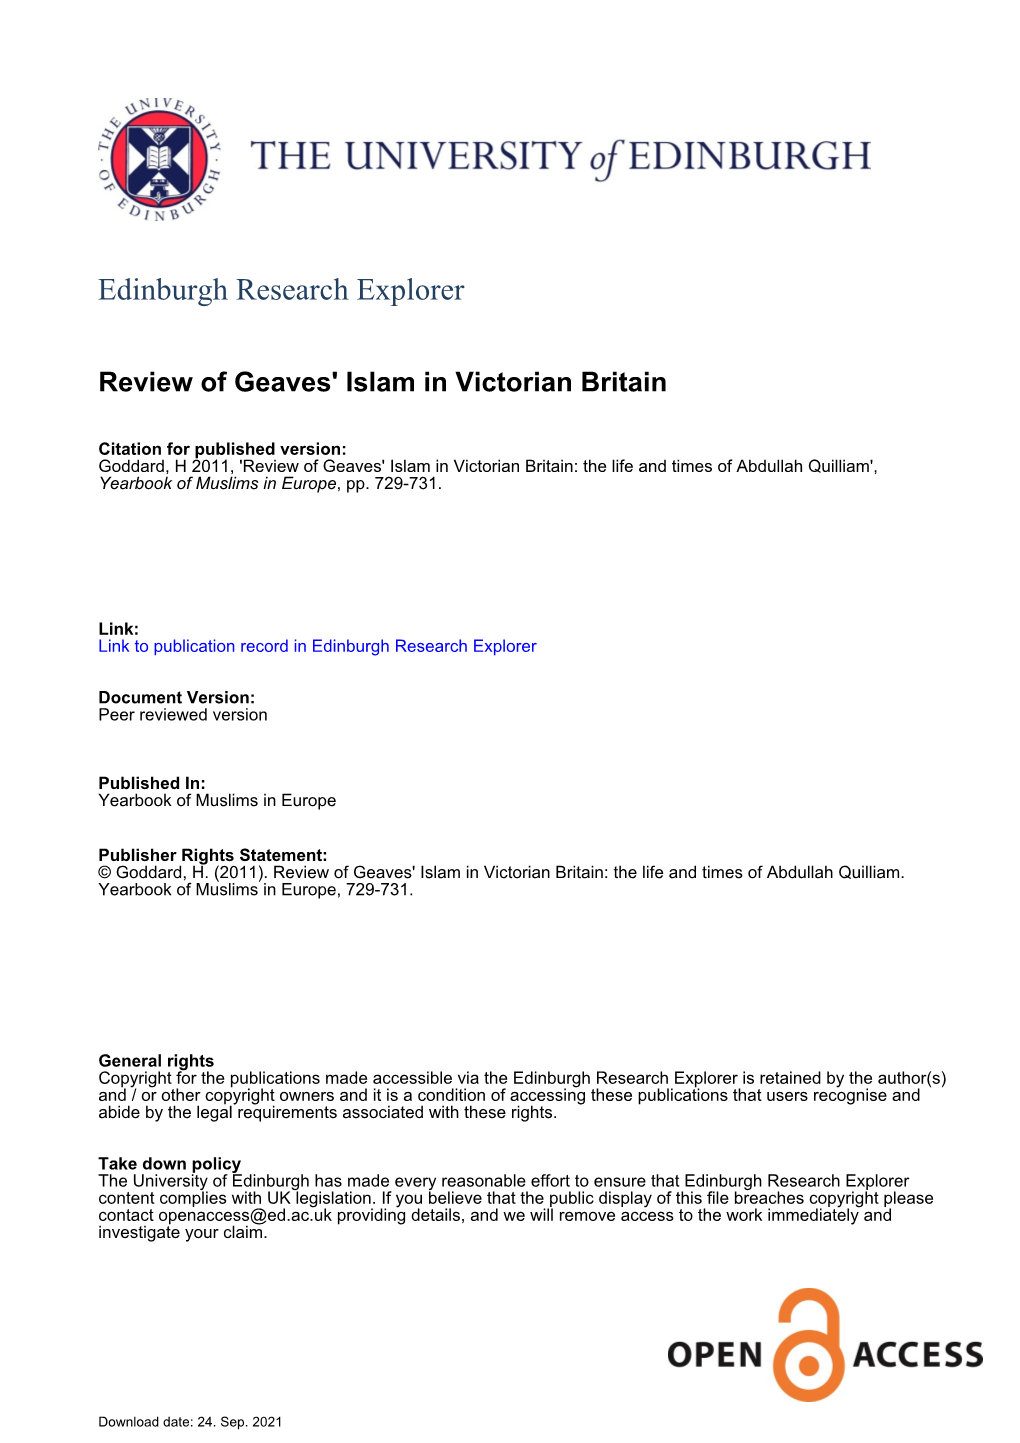 Review of Geaves' Islam in Victorian Britain